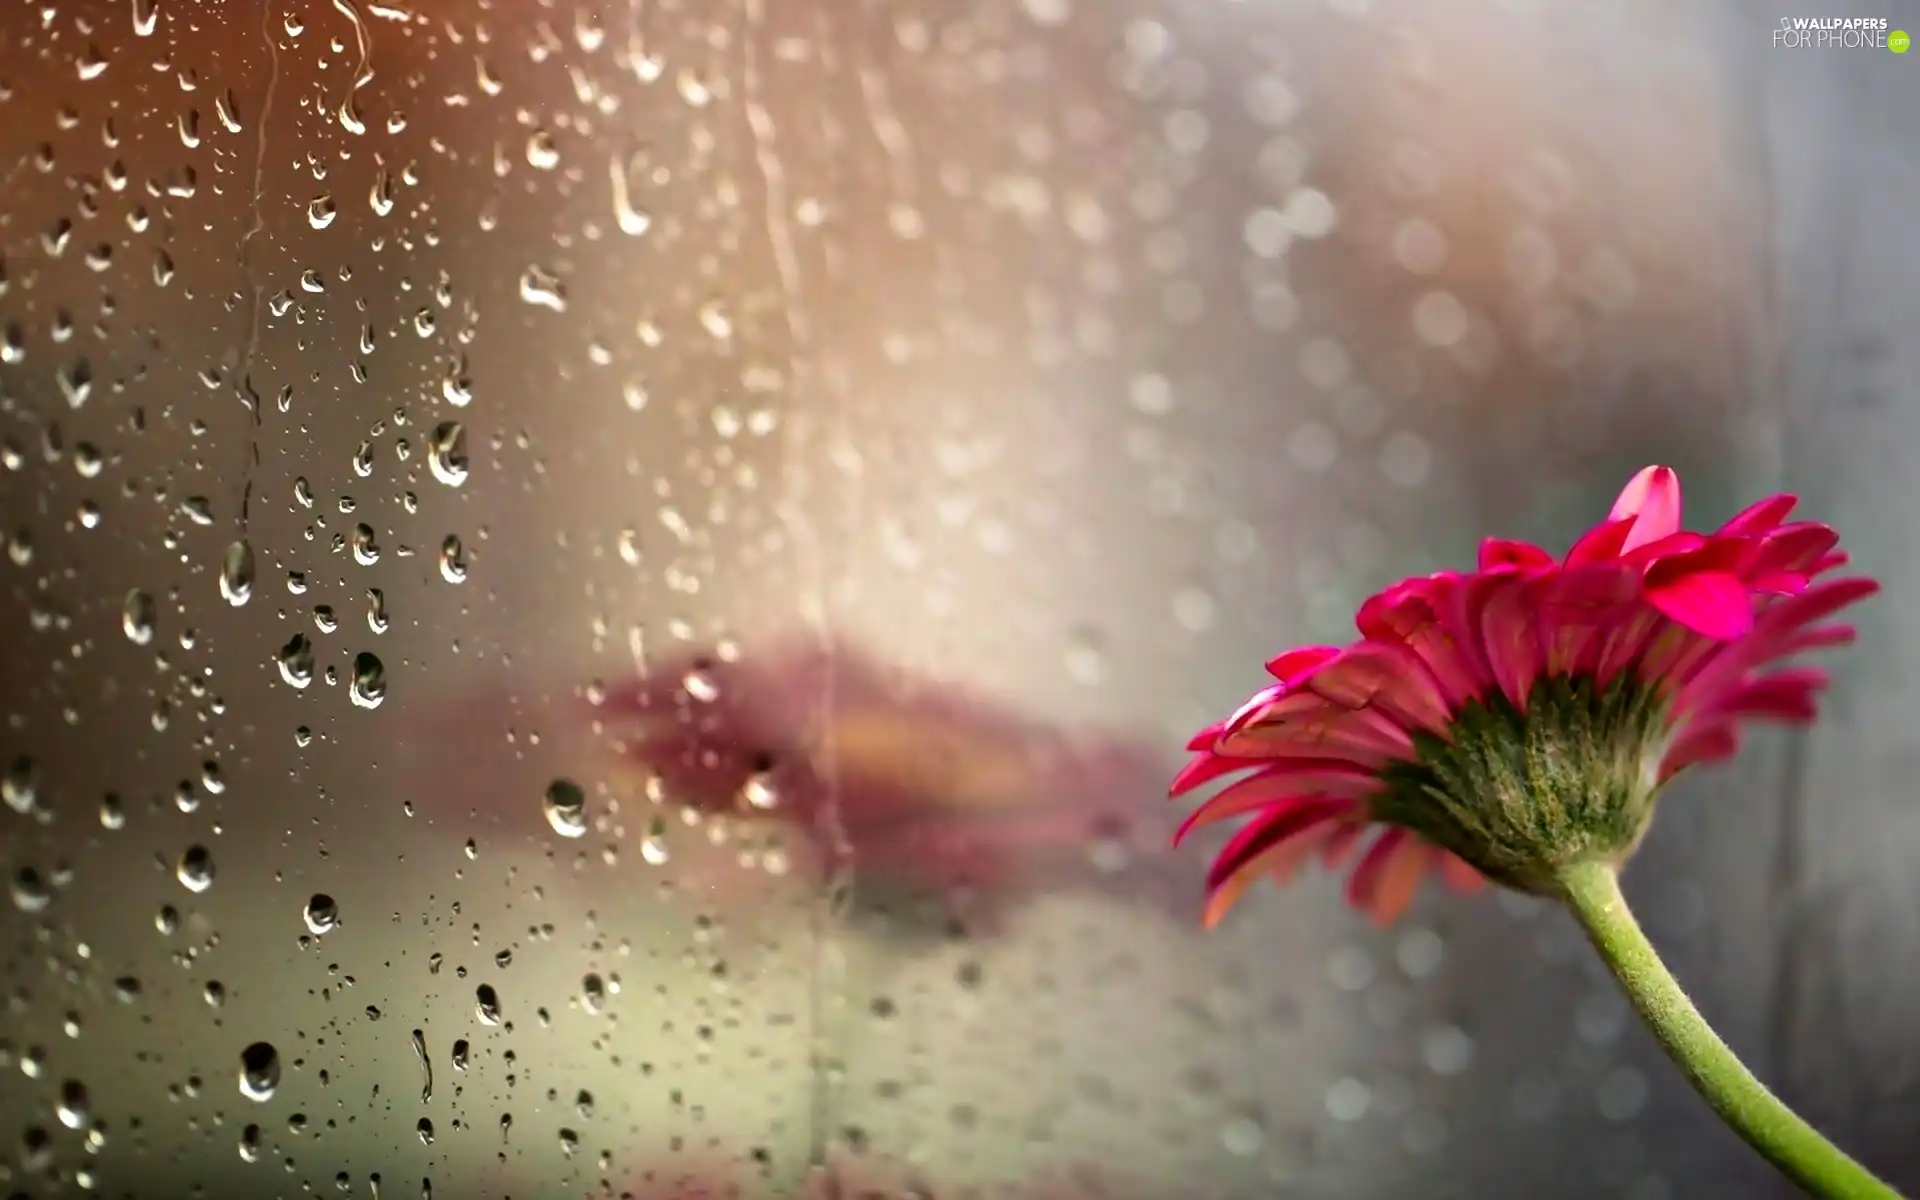 reflection, drops, Gerbera, Glass, Colourfull Flowers